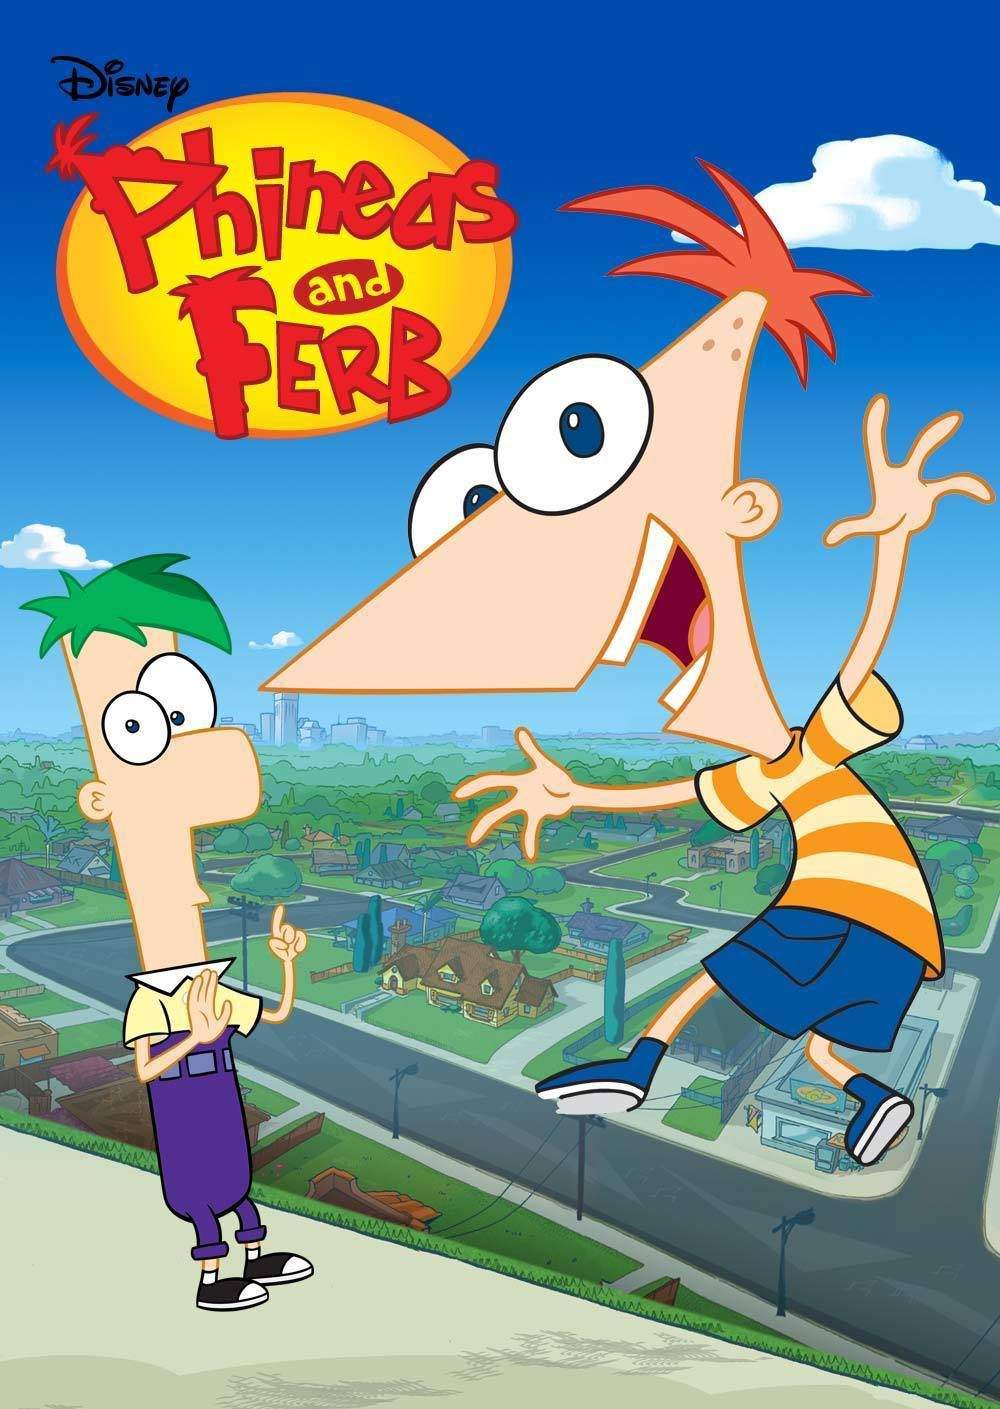 Happy 12th Anniversary Phineas and Ferb | Phineas and Ferb Amino